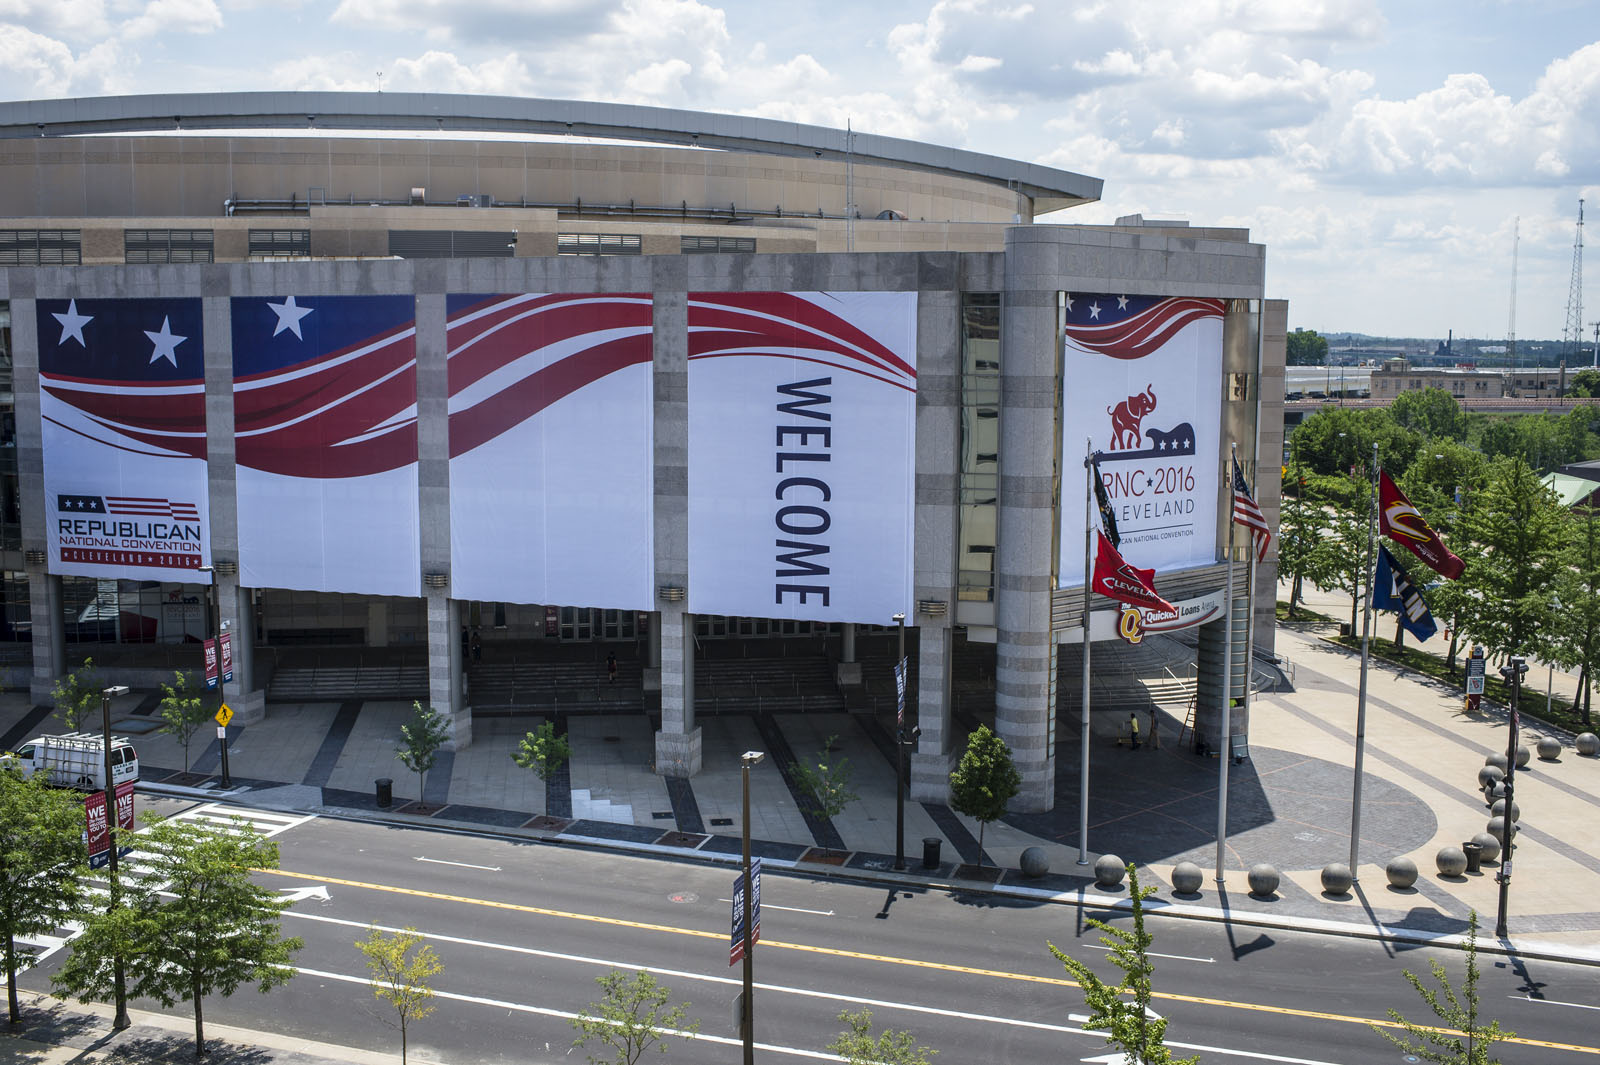 CLEVELAND, OH - JULY 11: Quicken Loans Arena is decorated to welcome the Republican National Convention on July 11, 2016 in Cleveland, Ohio. The convention will be held at the arena July 18-21, 2016. (Photo by Angelo Merendino/Getty Images)